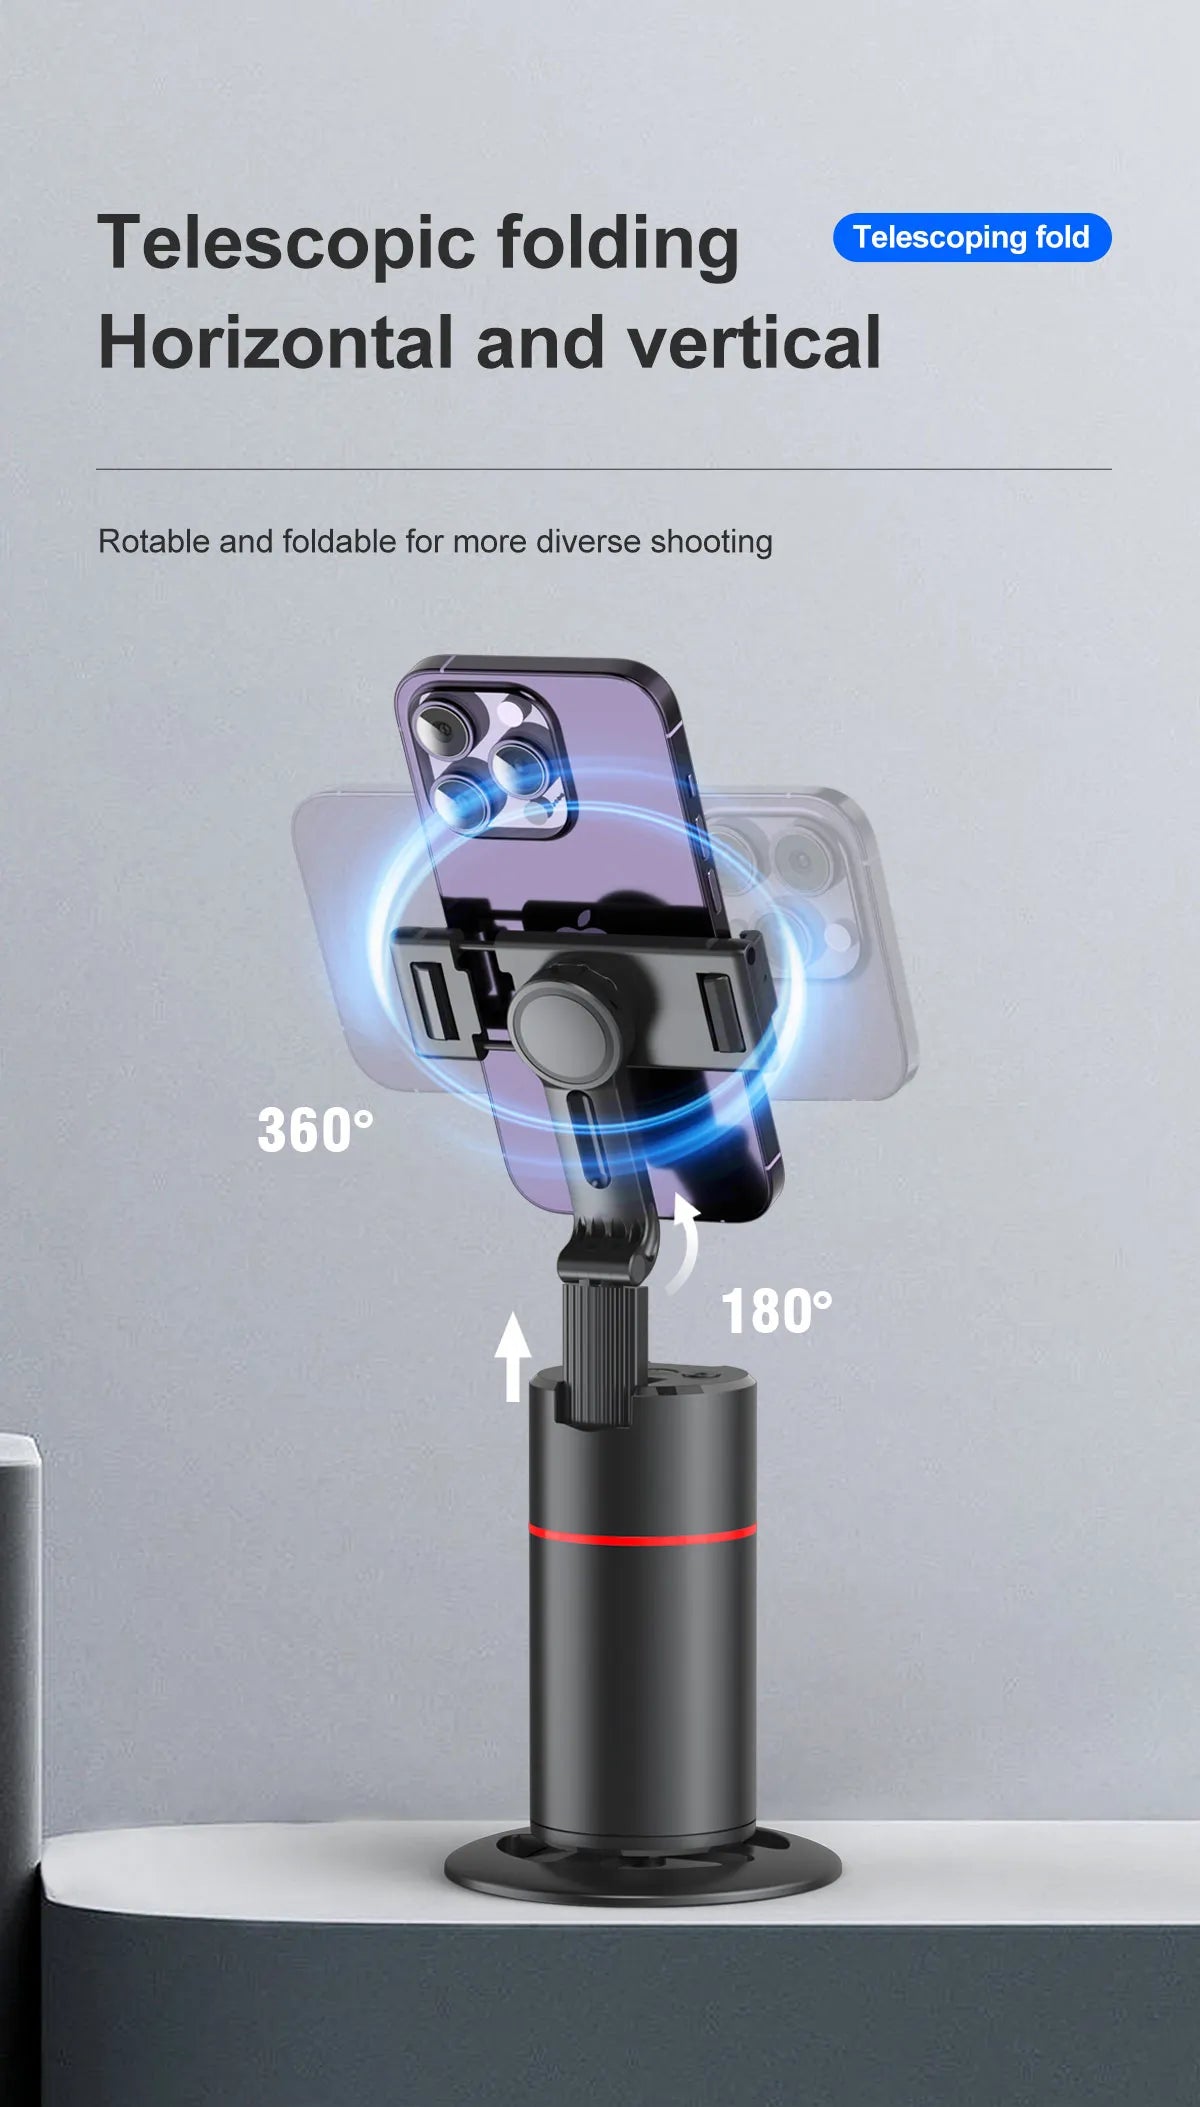 360  Facial Tracking Rotation Bluetooth Wireless Tripod. Phone Stabilizer Smart Facial Tracking with Removable Fill Light Phone Stand. Wireless Selfie Stick Tripod for Live Streaming.